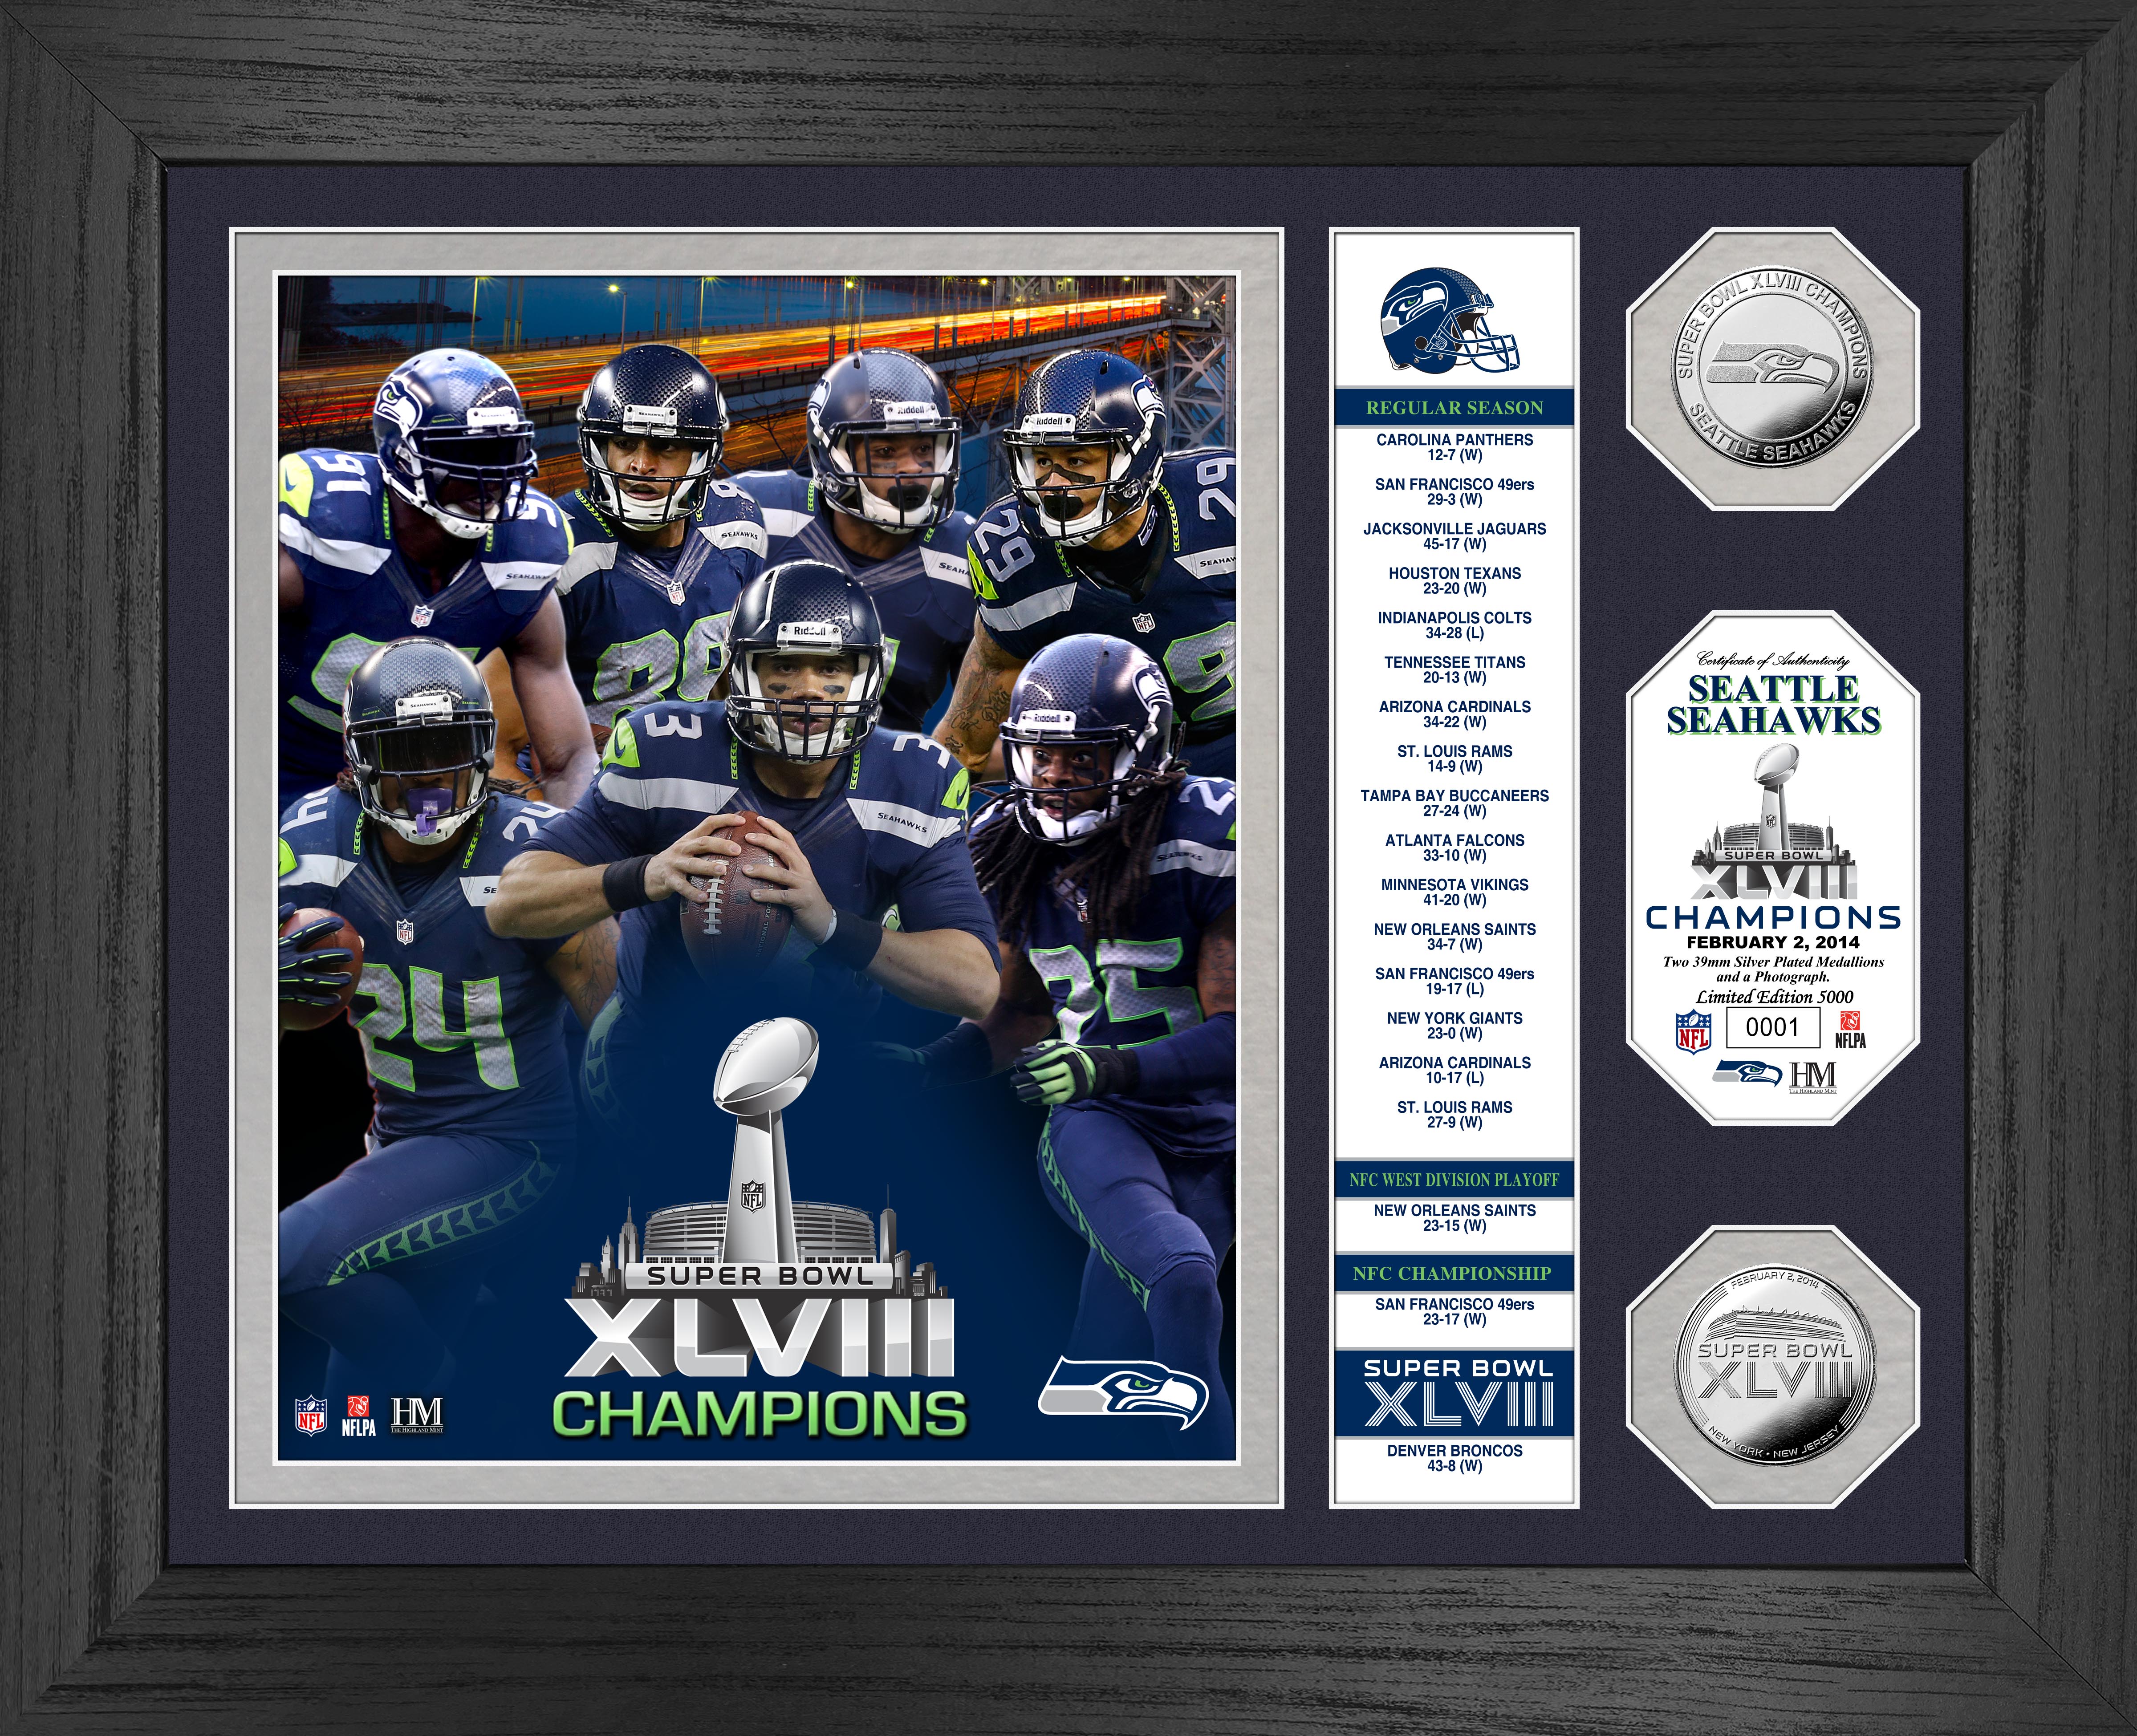 Seattle Seahawks Super Bowl 48 Champions "Banner" Silver Coin Photo Mint